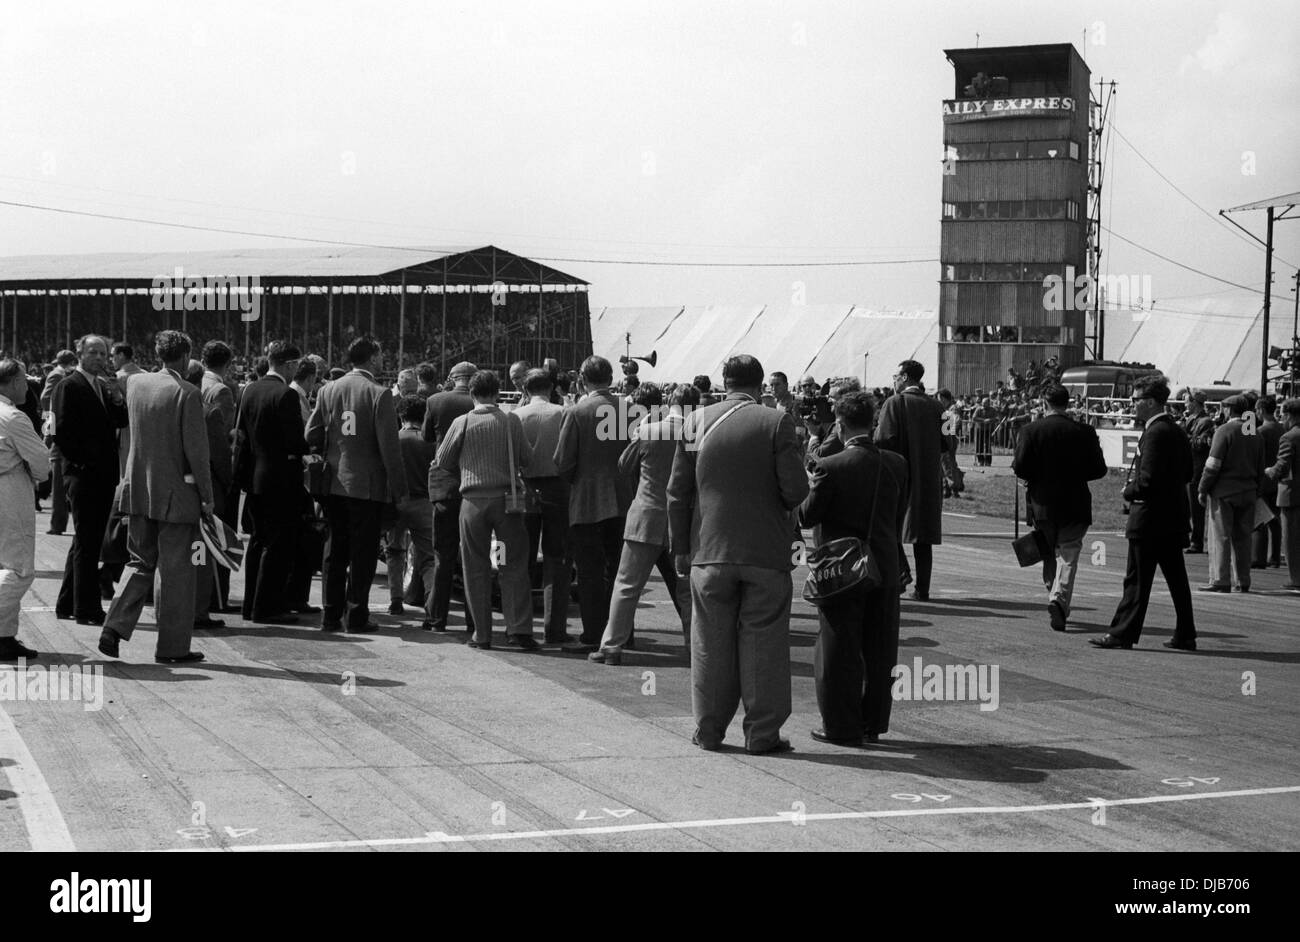 The press crowding onto the track at the International Trophy race, Silverstone, England 14 May 1960. Stock Photo